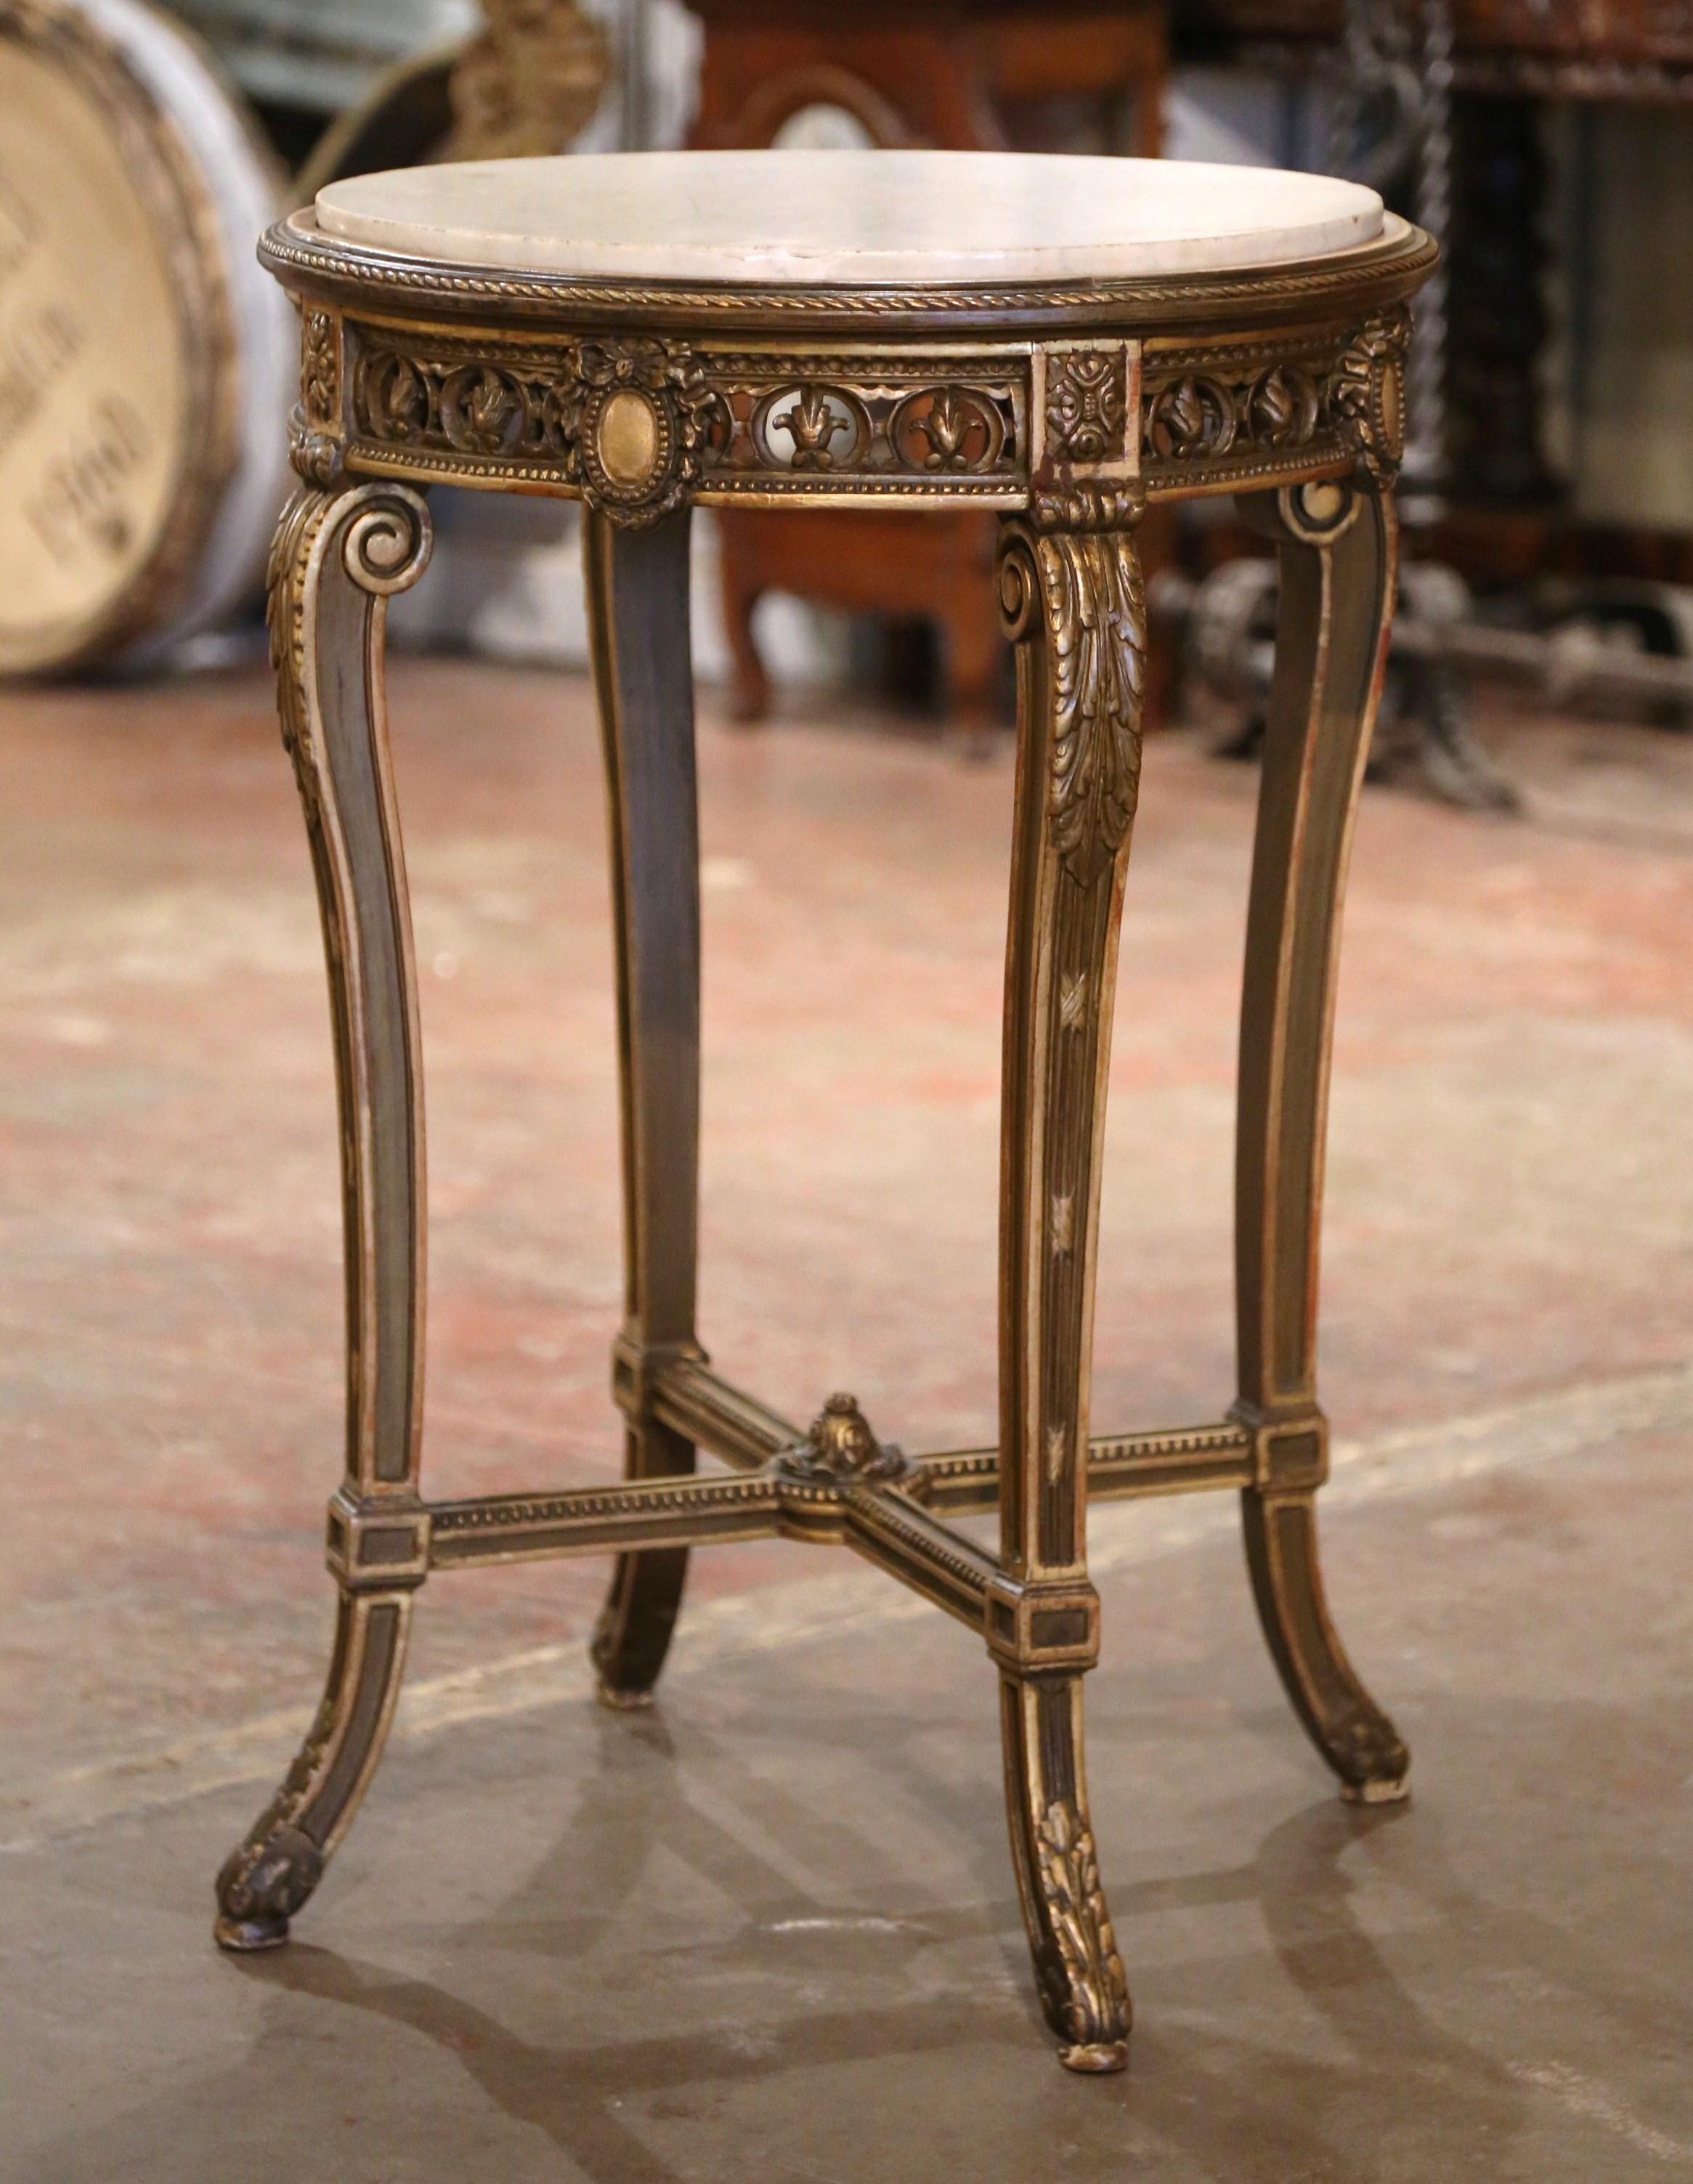  Decorate a den with this elegant antique side table. Crafted in France circa 1880, and round in shape, the table sits on cabriole legs decorated with acanthus leaf motifs at the shoulders and ending with leaf decor over the feet. The table features